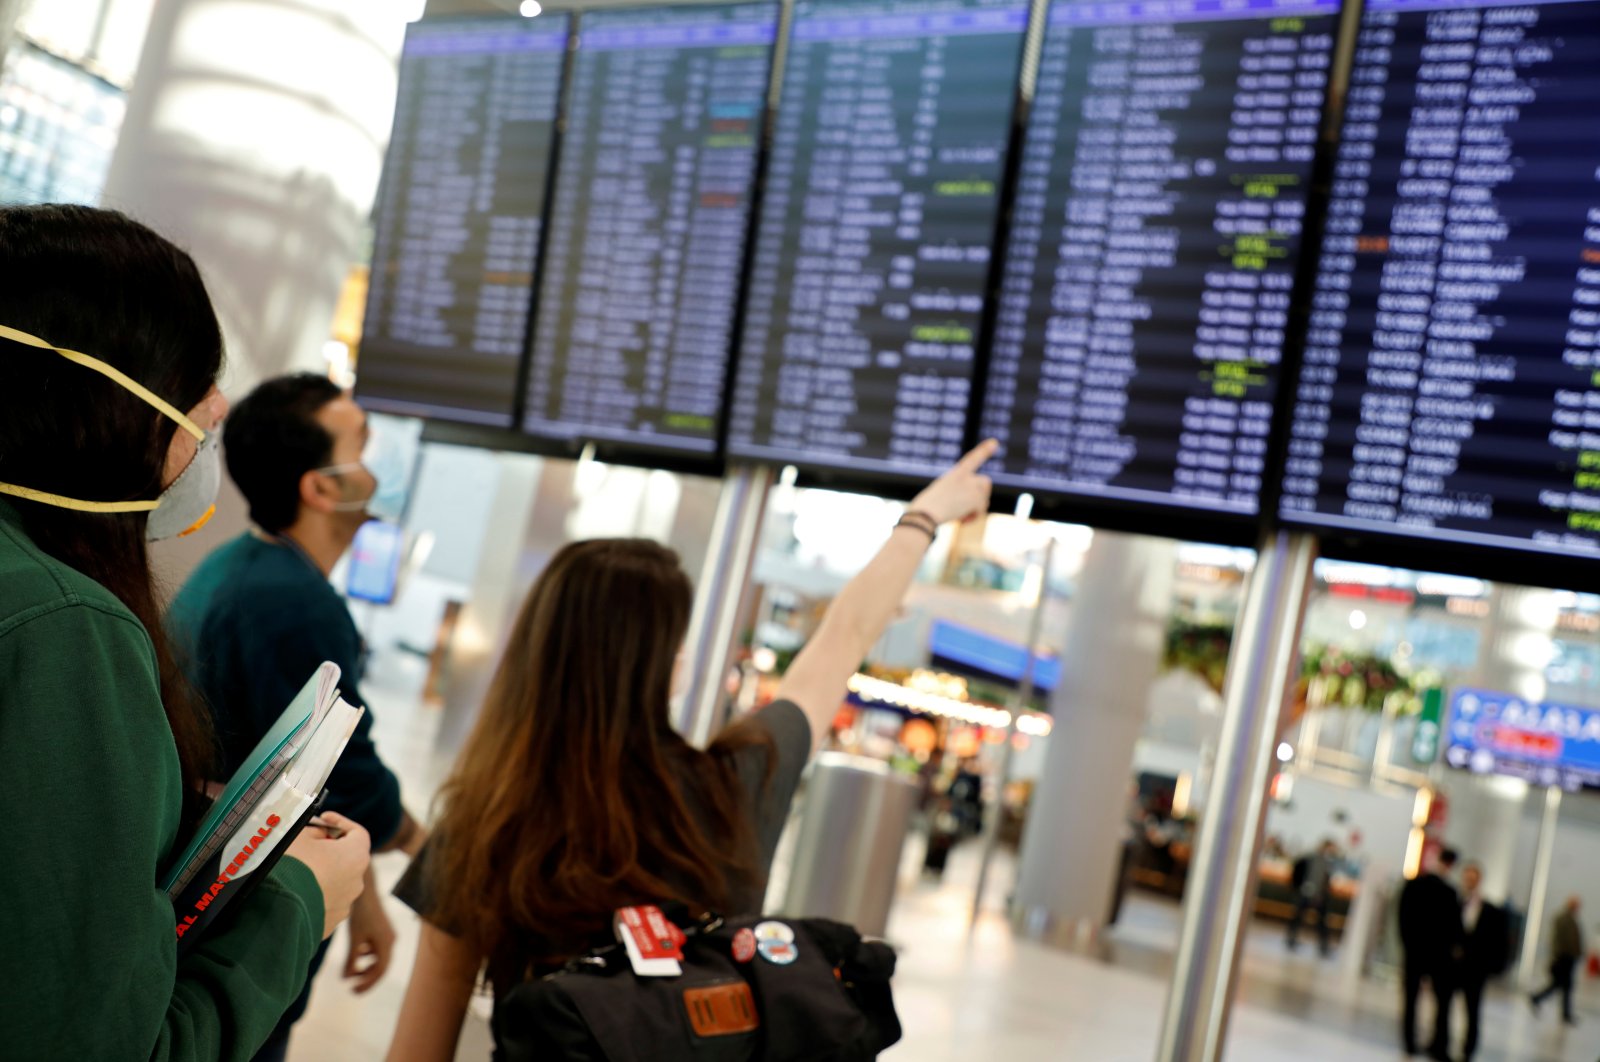 People, wearing protective face masks to protect against the coronavirus, look at flight status information at Istanbul Airport, Friday, March 13, 2020. (Reuters Photo)